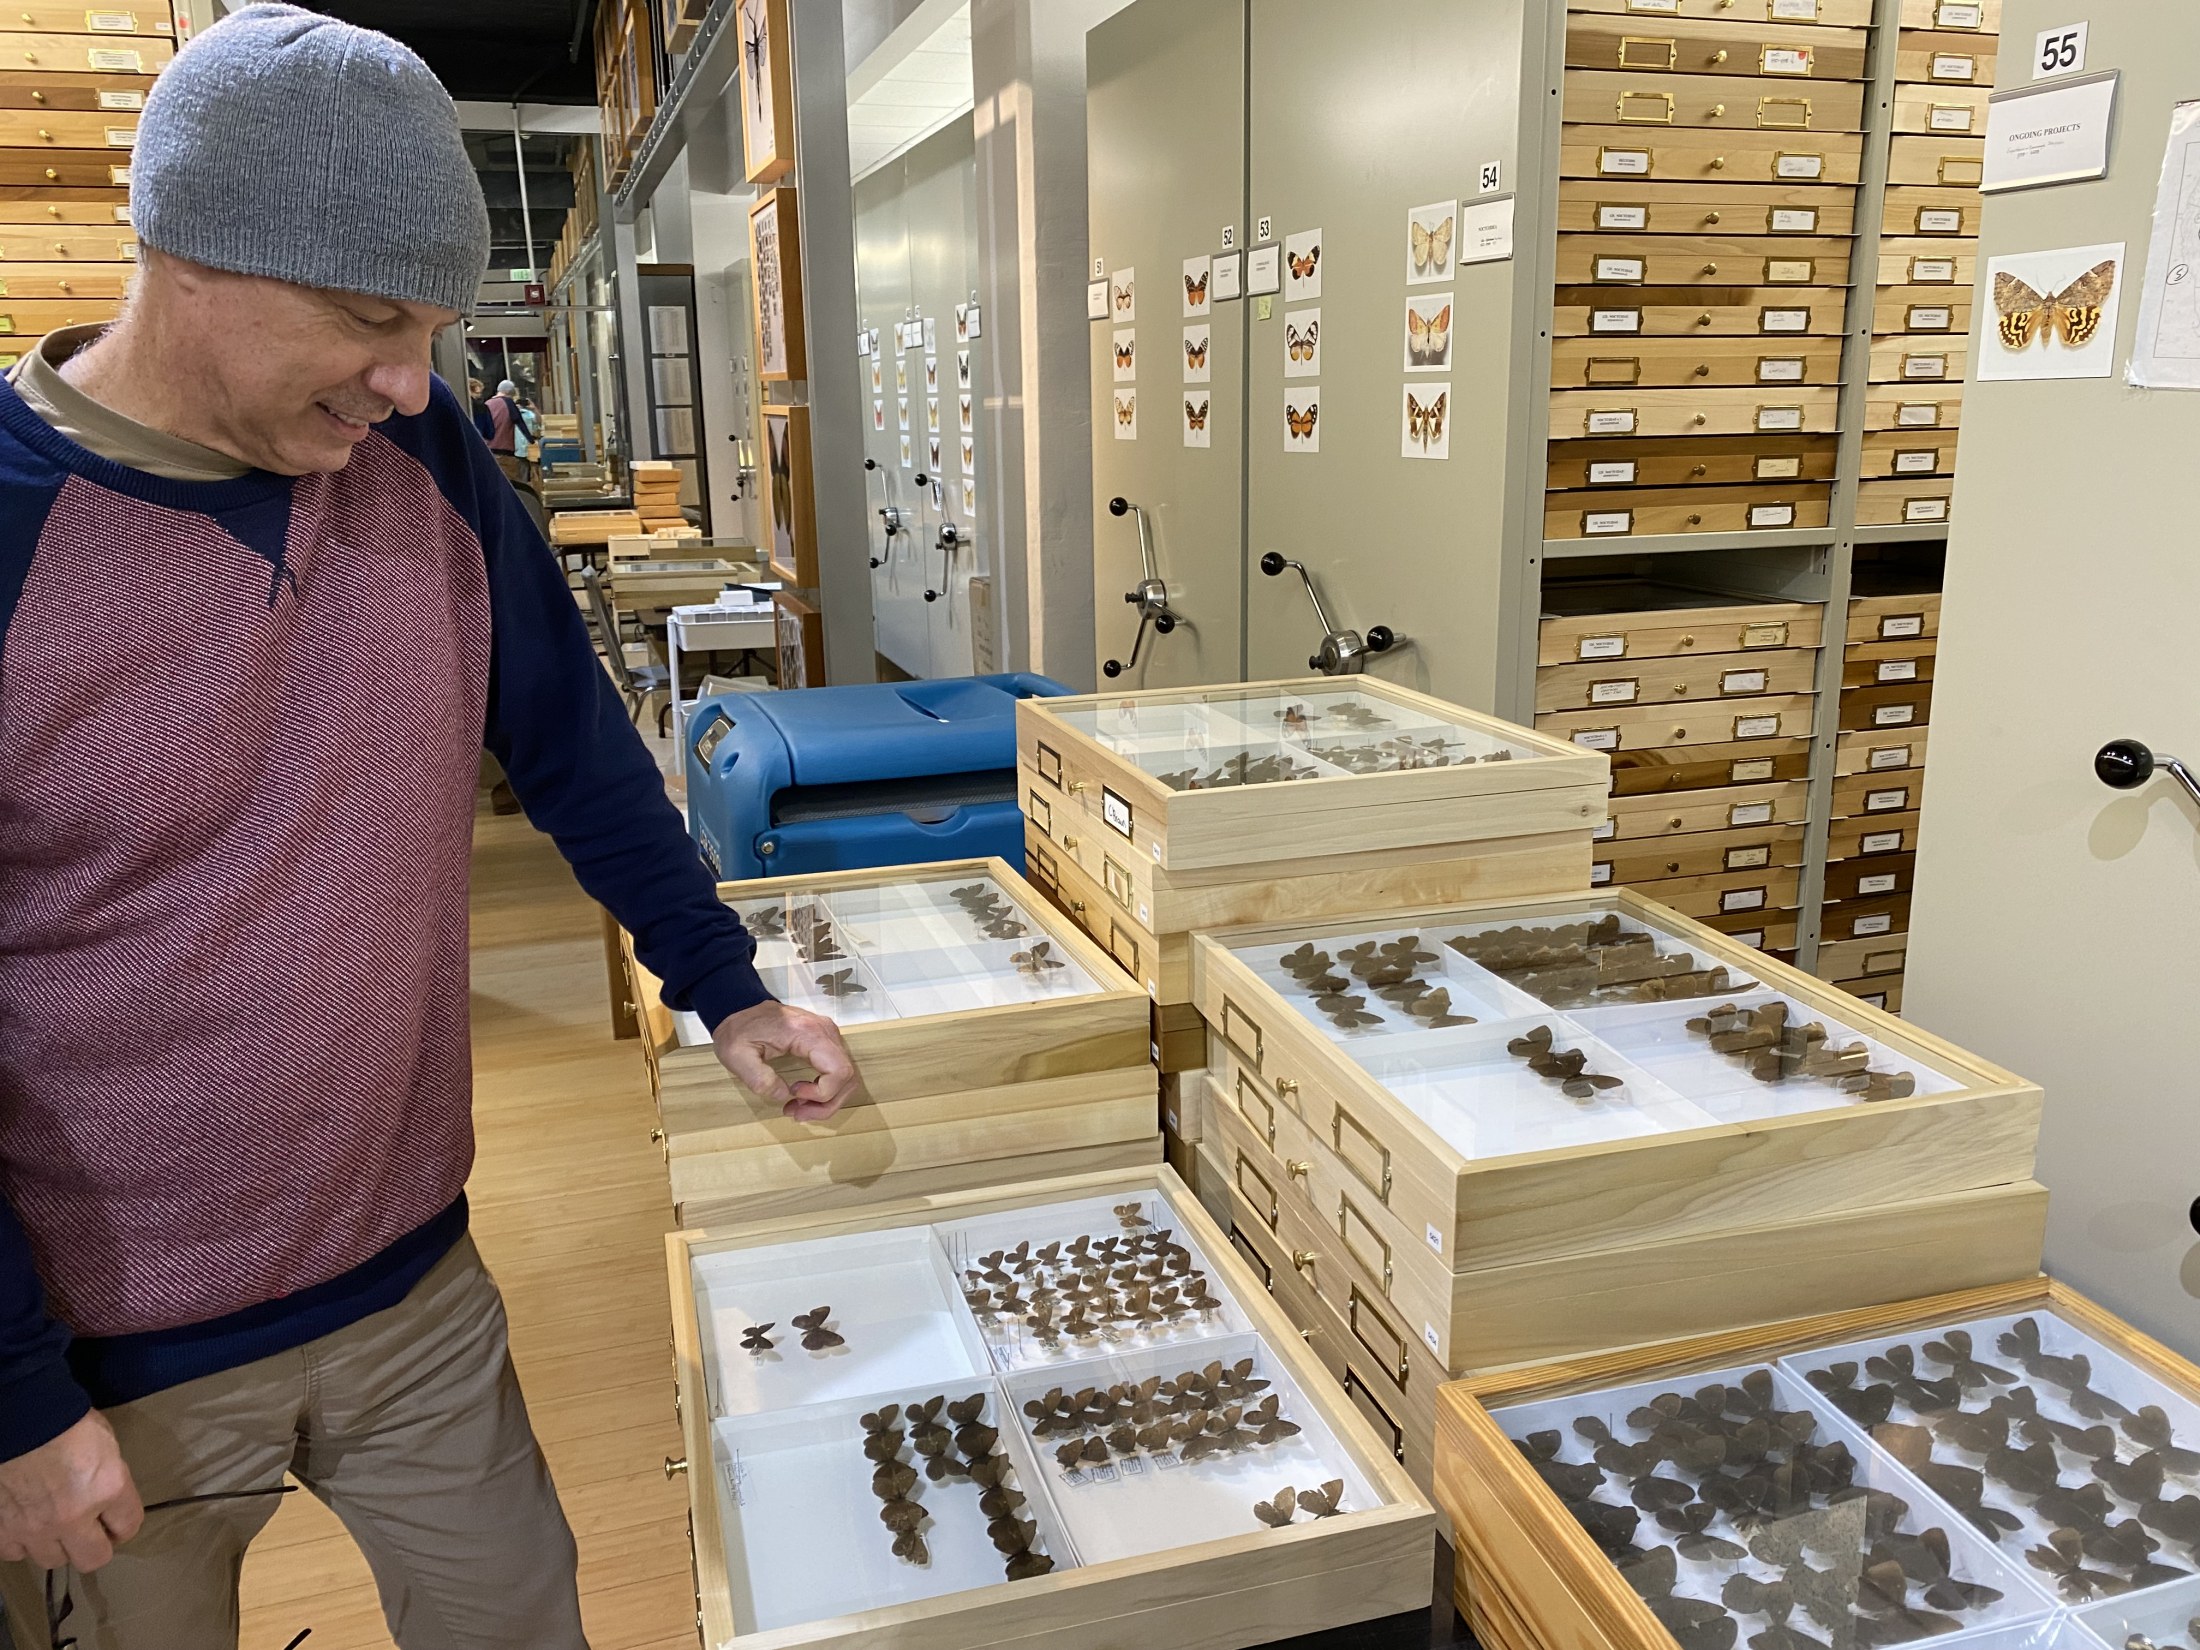 Man viewing butterflies in glass topped cases.